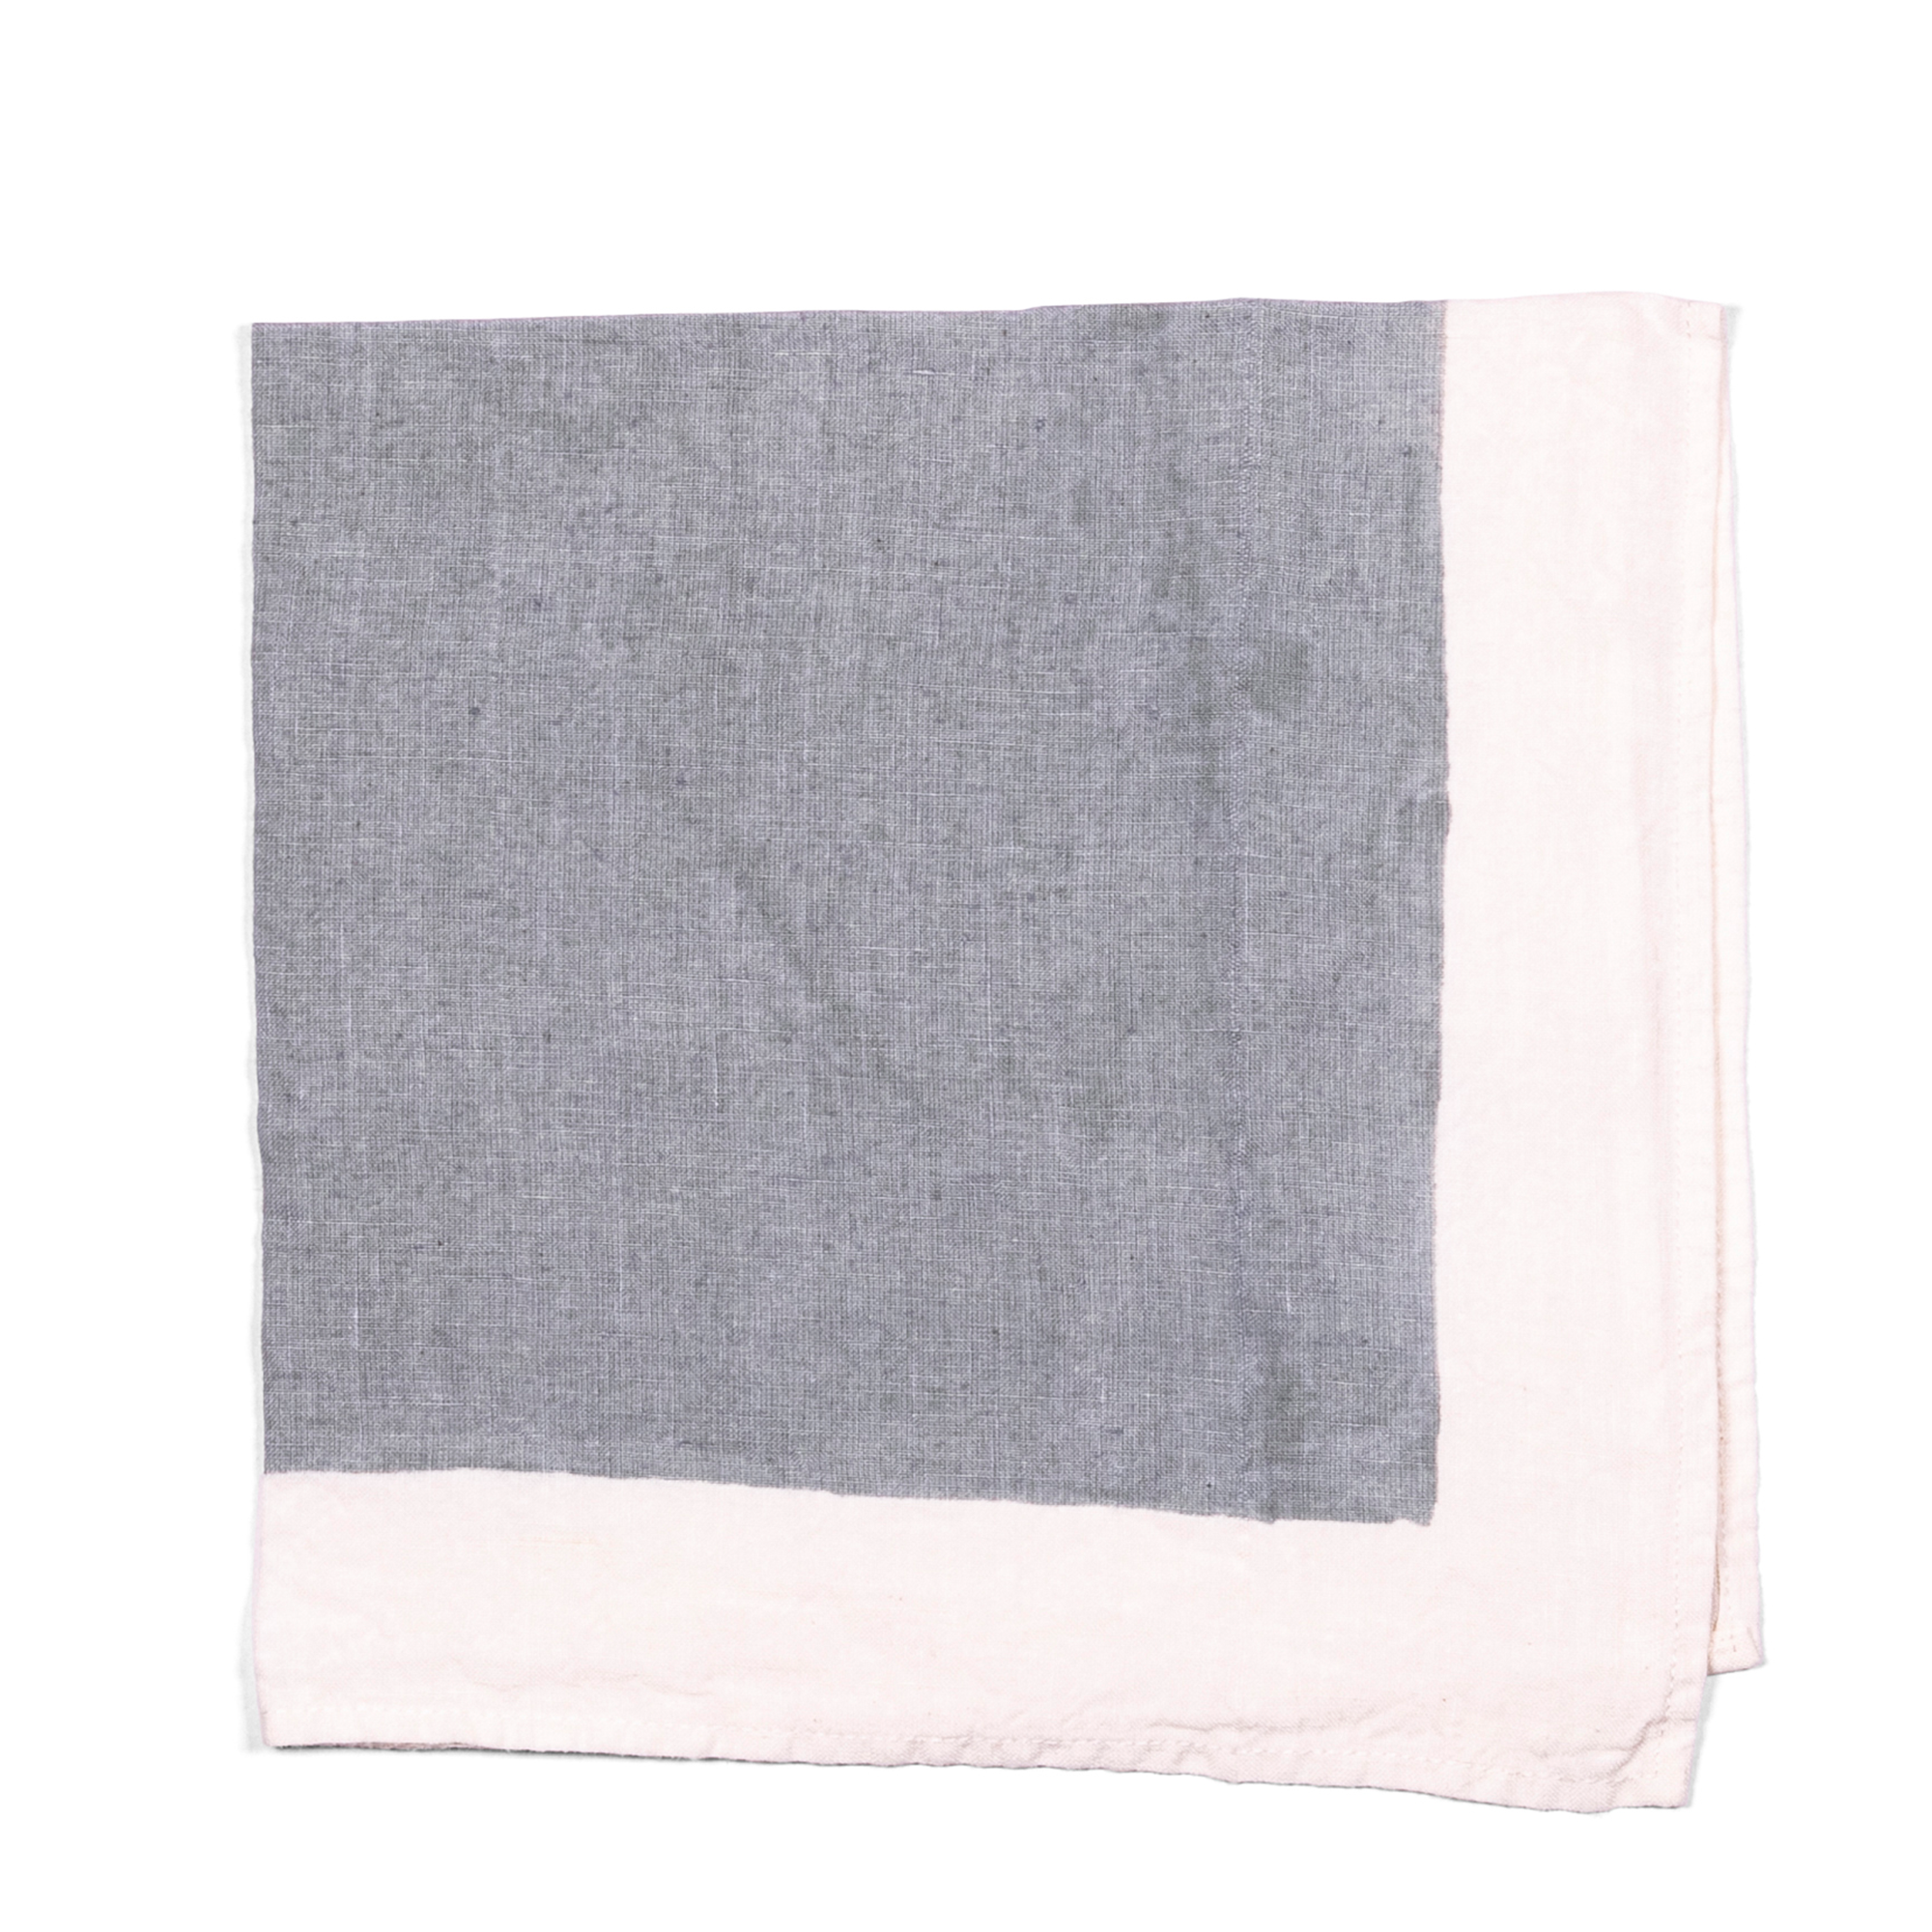 A stylish grey linen napkin with white borders, handmade using pear wood.  Can be used for breakfast, formal dining, or garden tablescape.